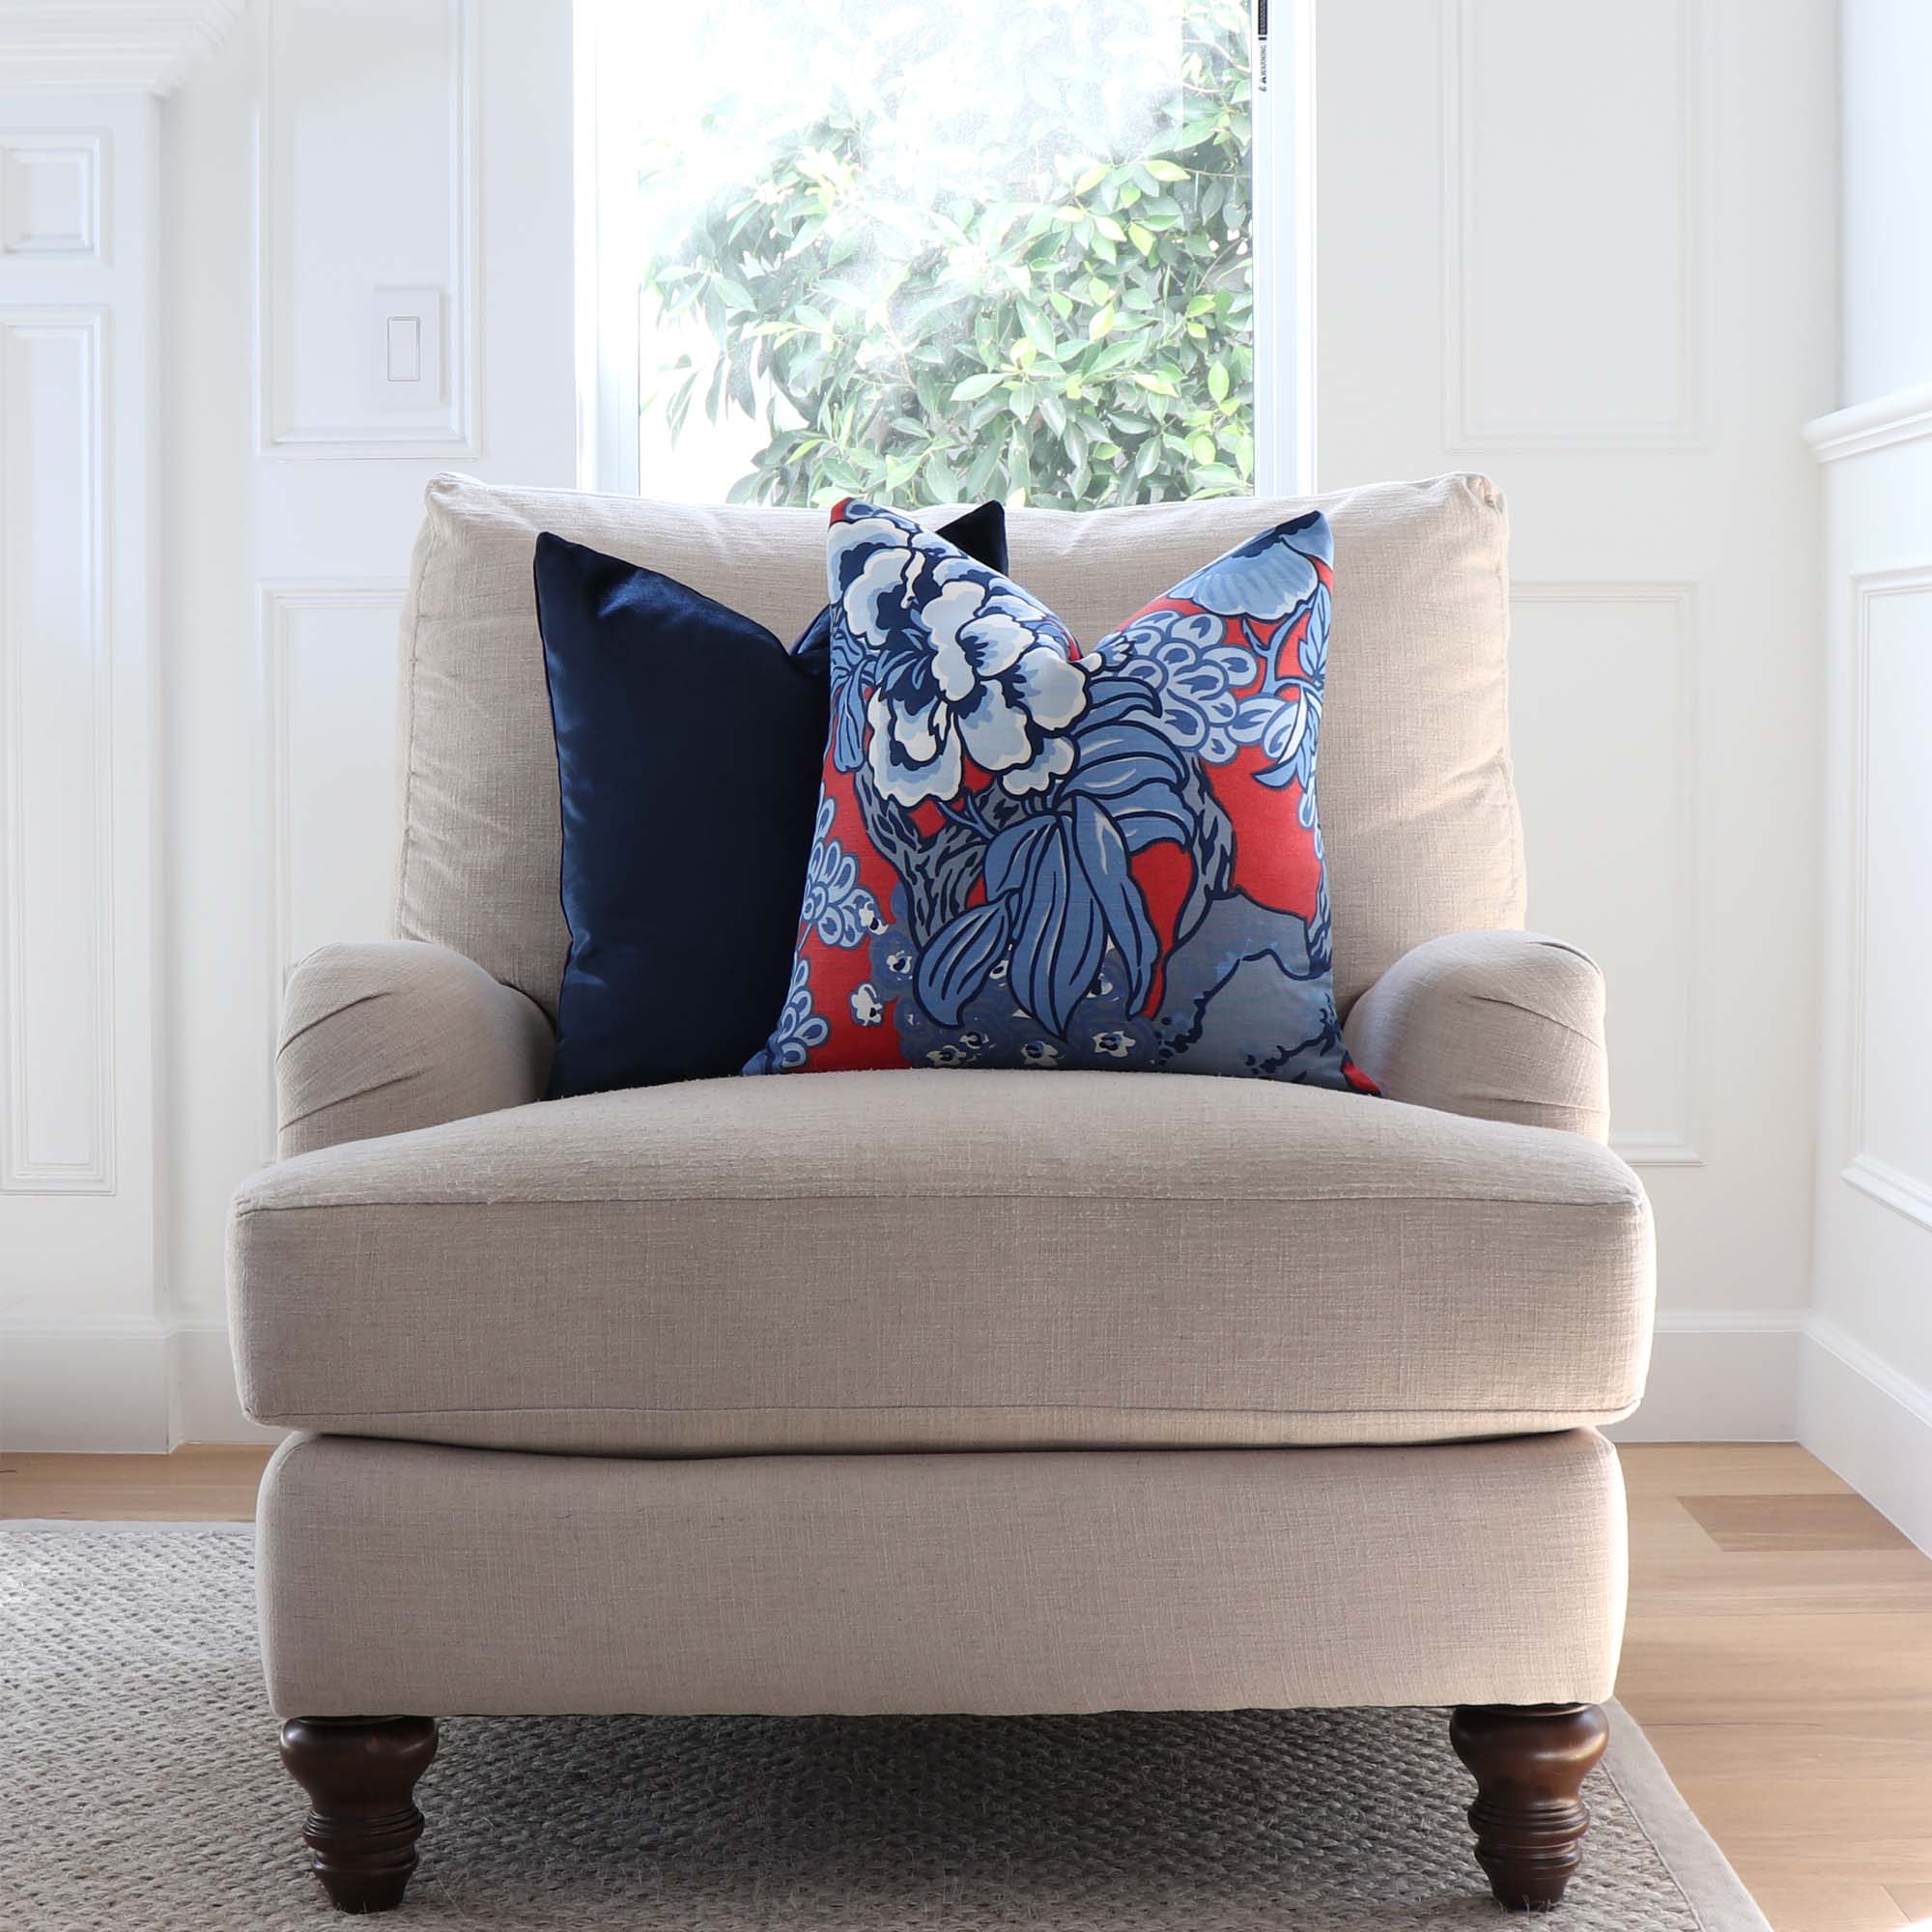 Thibaut Honshu Red and Blue Floral Decorative Designer Throw Pillow Cover on Armchair